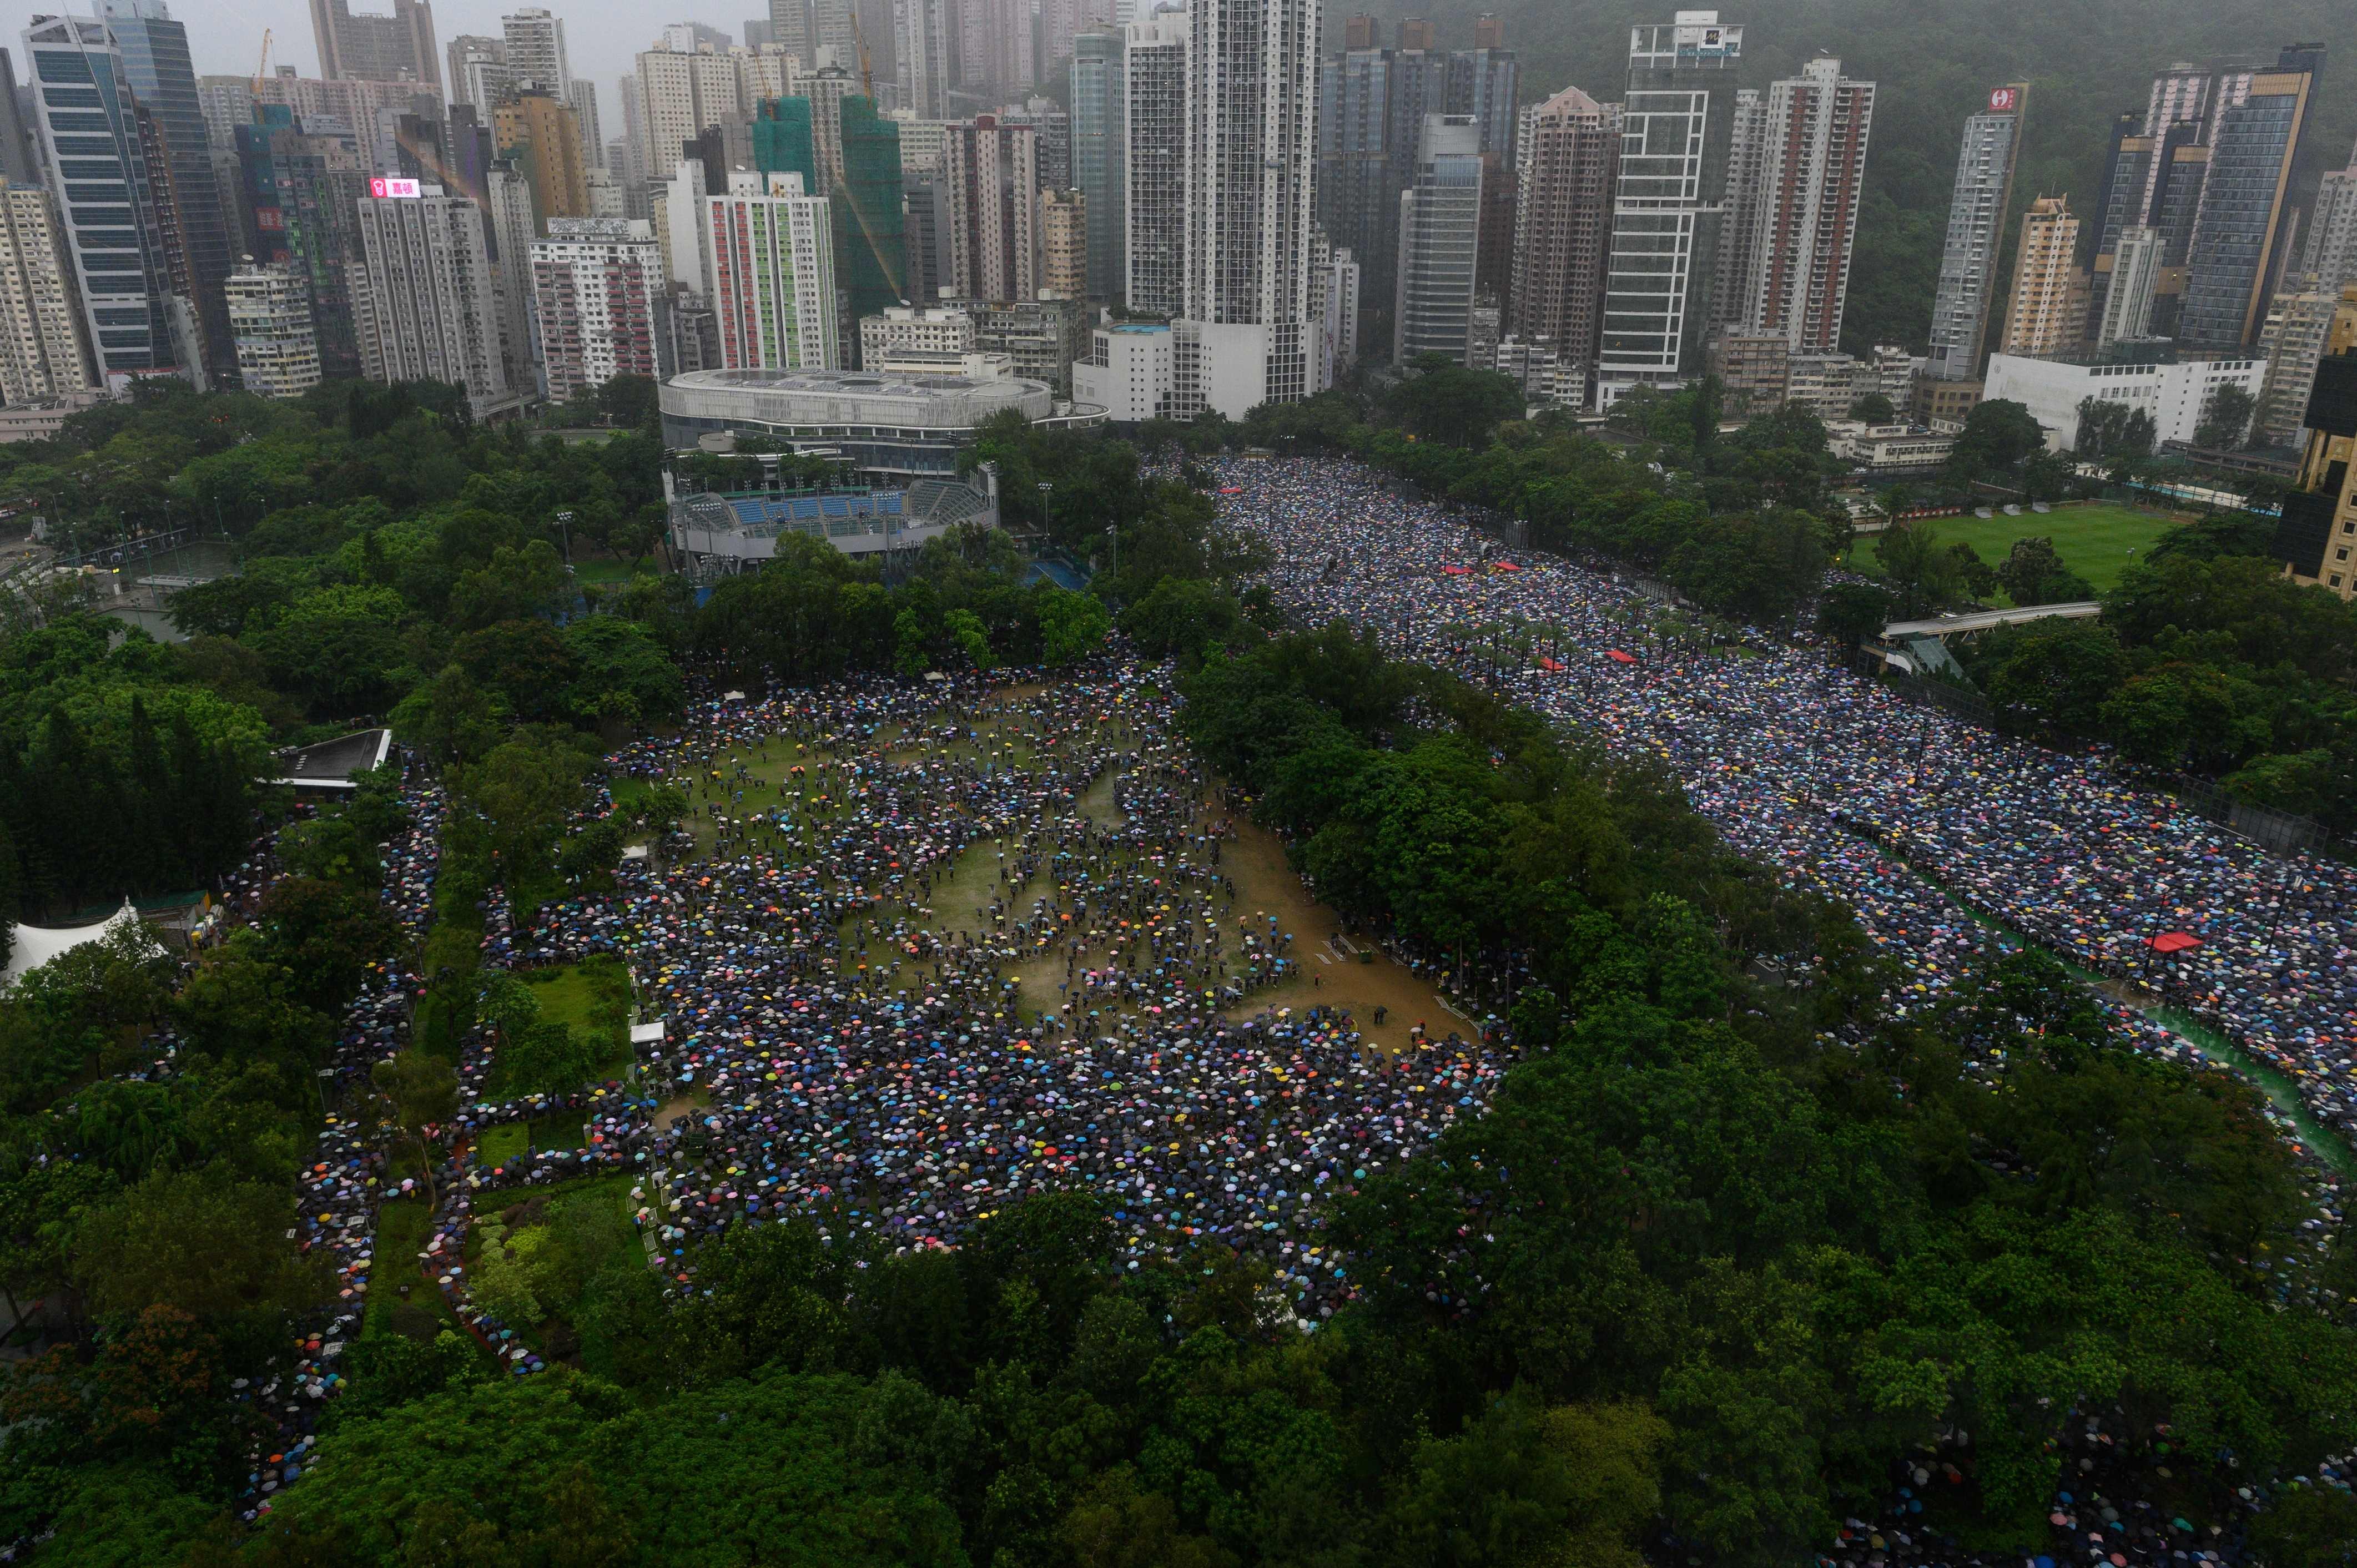 Protesters gather for a rally in Victoria Park on August 18. The main issue driving the peaceful marches involving millions may be the increasing “mainlandisation” of Hong Kong, instead of housing. Photo: AFP